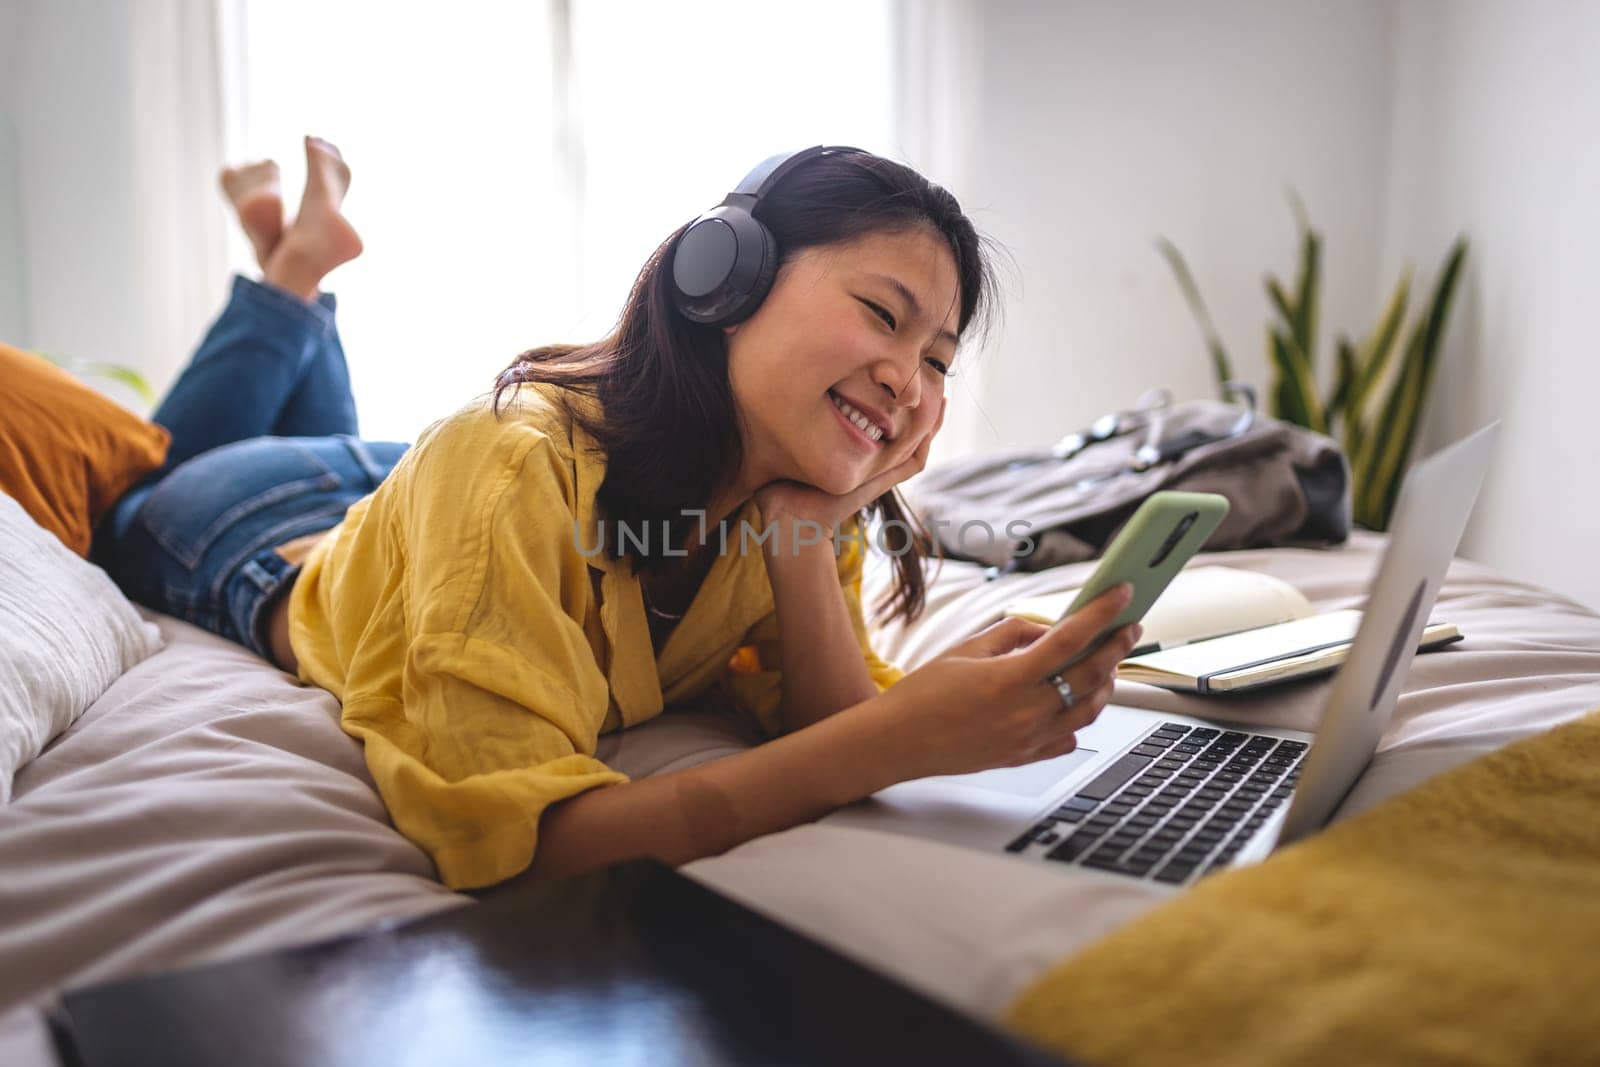 Female chinese college student using phone and headphones listening to music lying on bed. Asian young woman relaxing. by Hoverstock